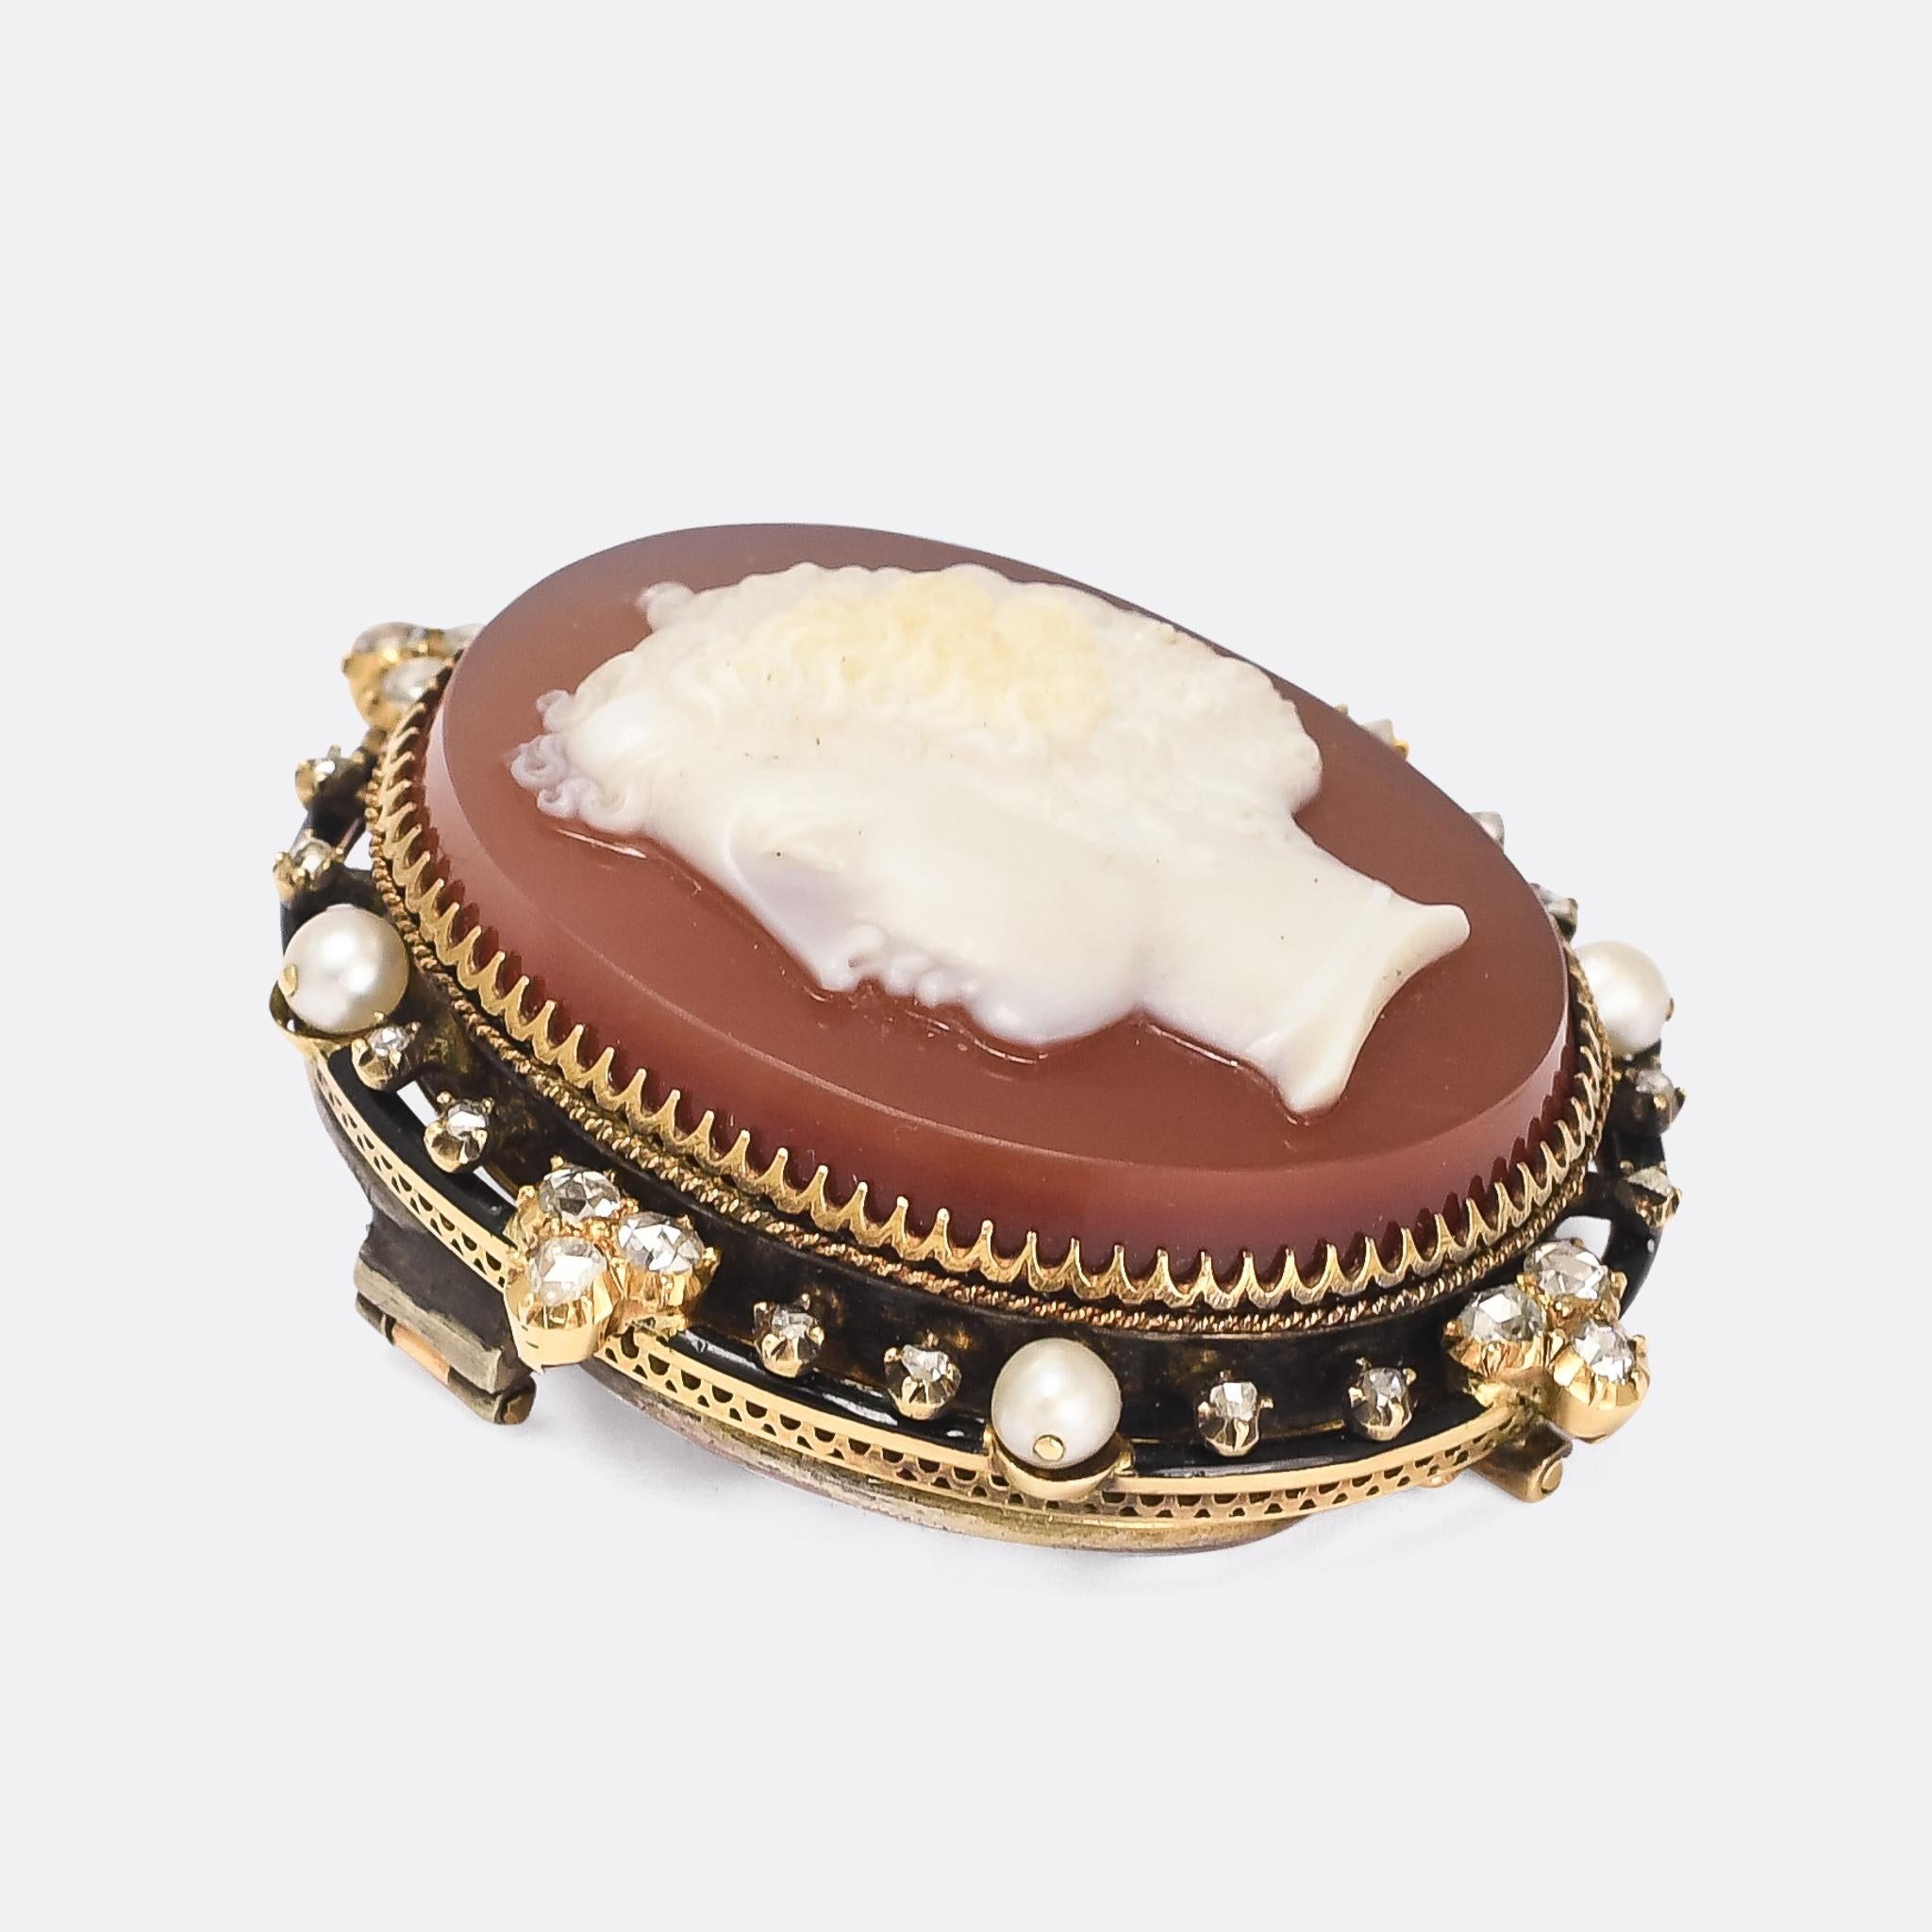 A cool Victorian cameo brooch mounted in an elaborate rose cut diamond, natural pearl, and black enamel border. The cameo itself is wonderfully executed, in white hardstone agate with a red backdrop, it depicts a classical style woman with tightly